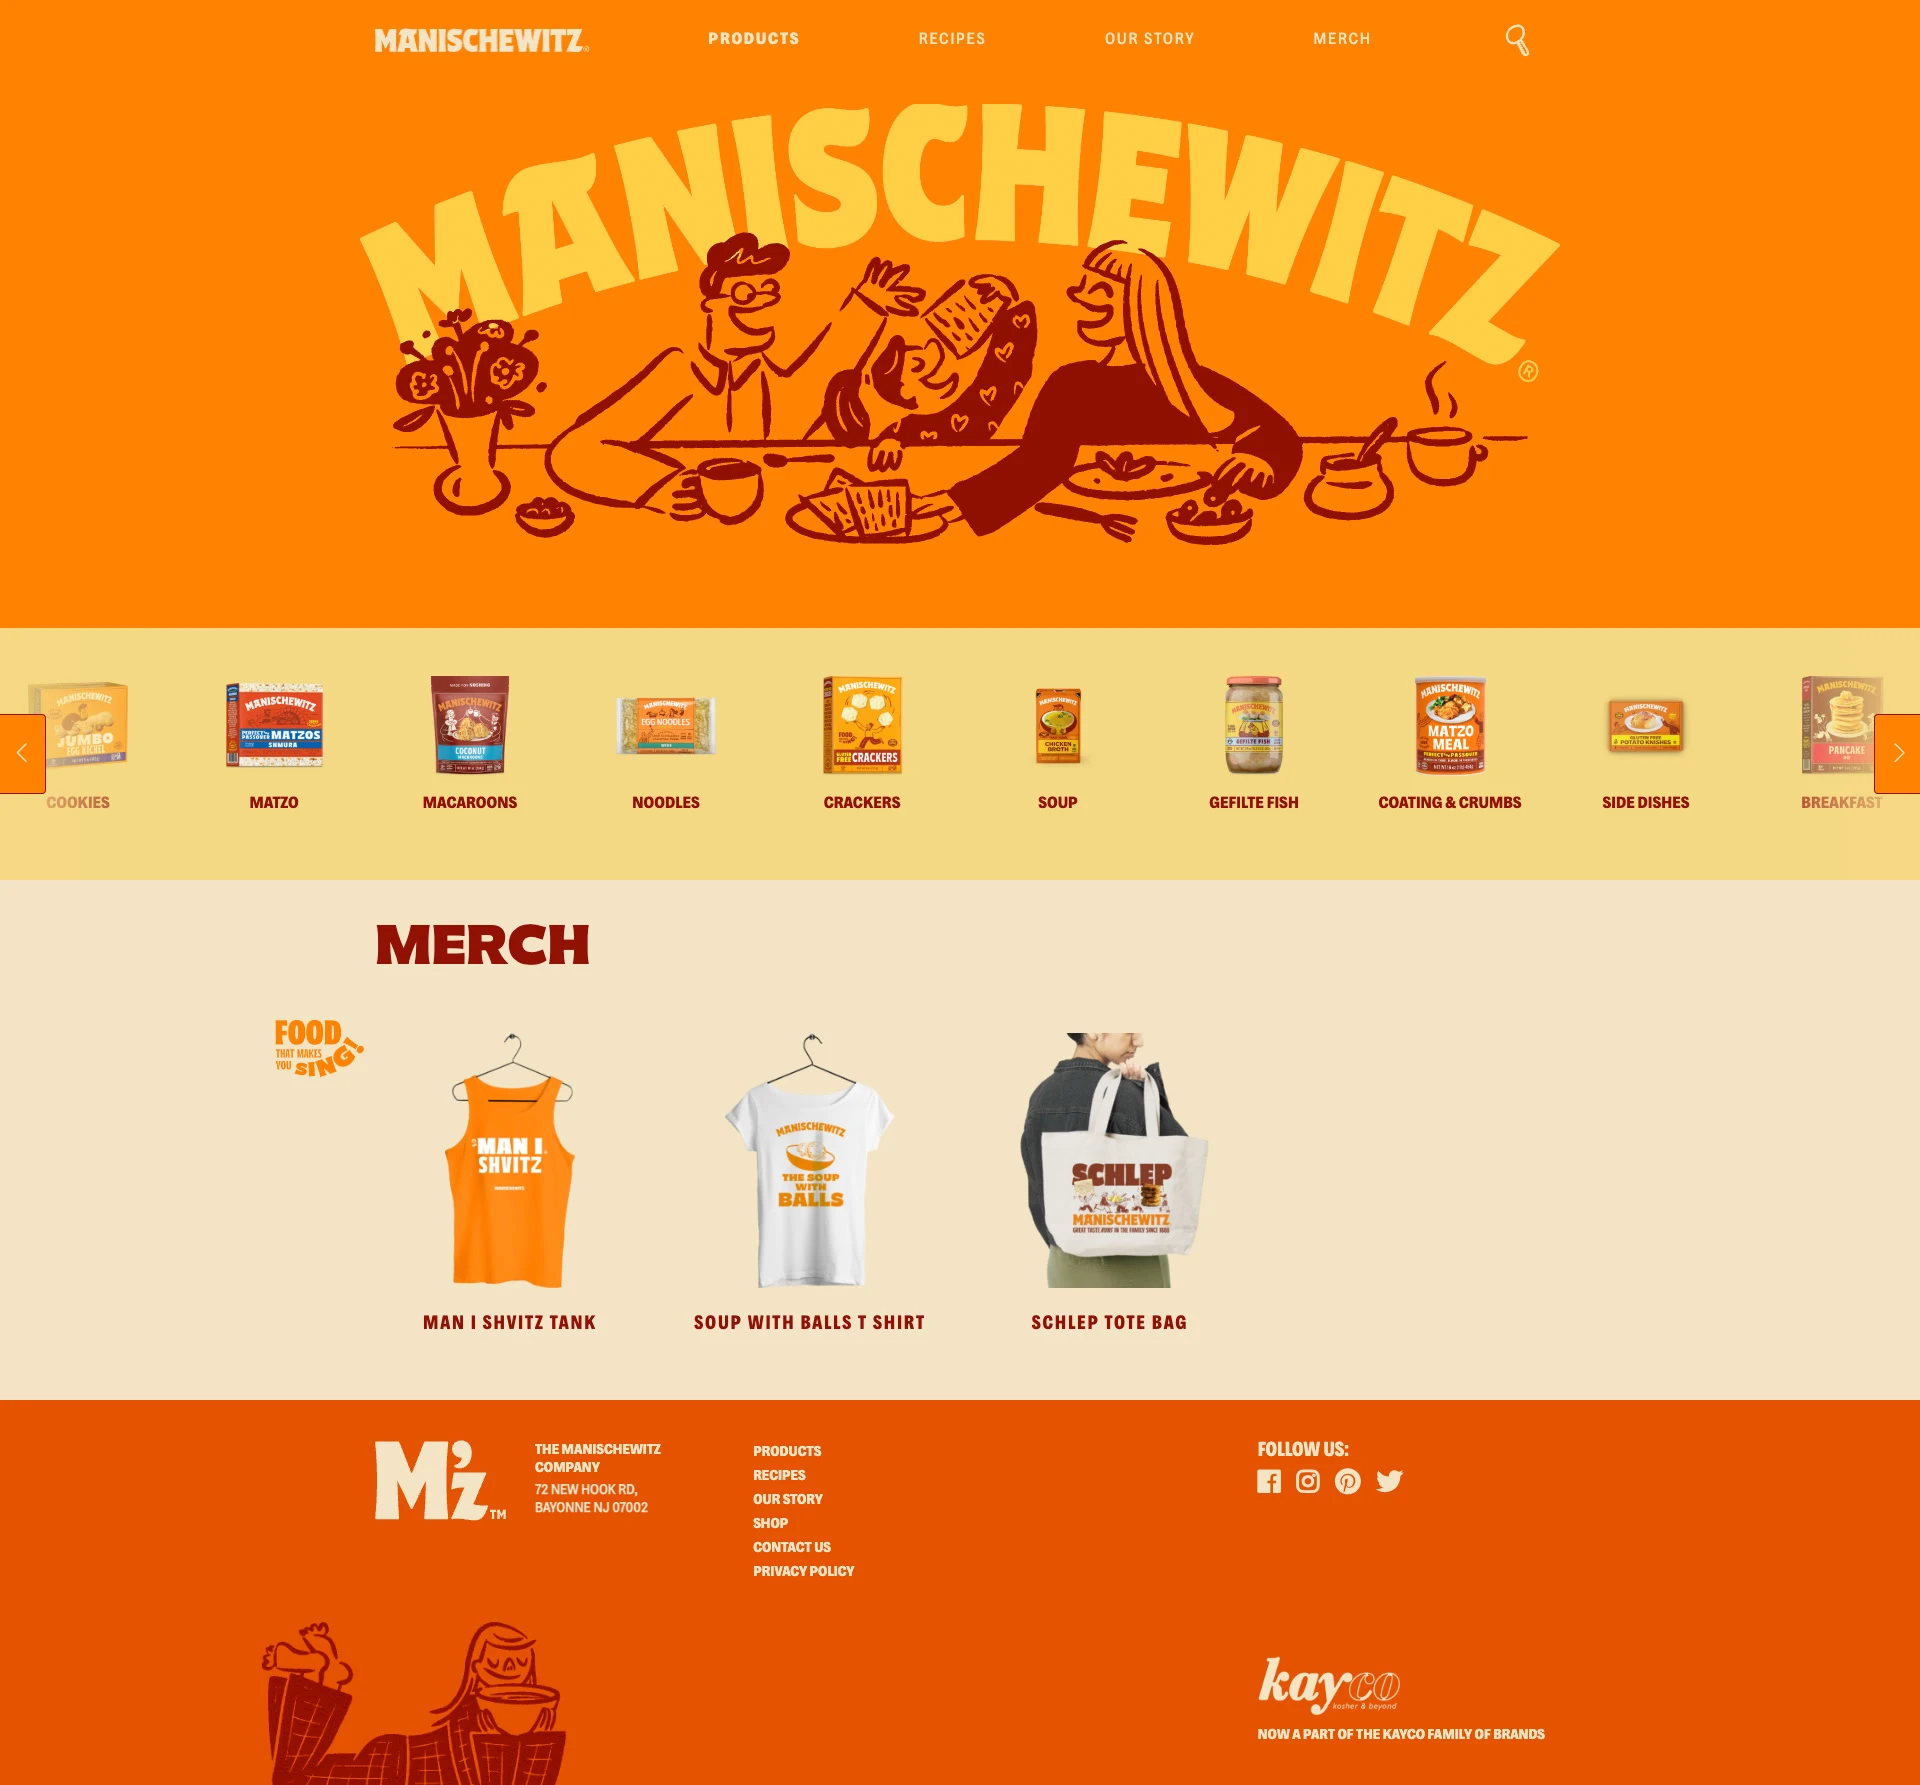 Manischewitz Landing Page Example: The Manischewitz Company has been making traditional Jewish foods since 1888, all going back to when Rabbi Dov Behr Manischewitz founded a small Matzo bakery in Cincinnati, Ohio. During that great age of American innovation, he tinkered away in his small bakery and discovered that the secret to machine matzo is square! That's how first entirely automated Kosher matzo production was born. Certified by an assembly of Rabbis from all over the world, they travelled from far and wide to witness Rabbi Manischewitz’s marvelous matzo making machine.